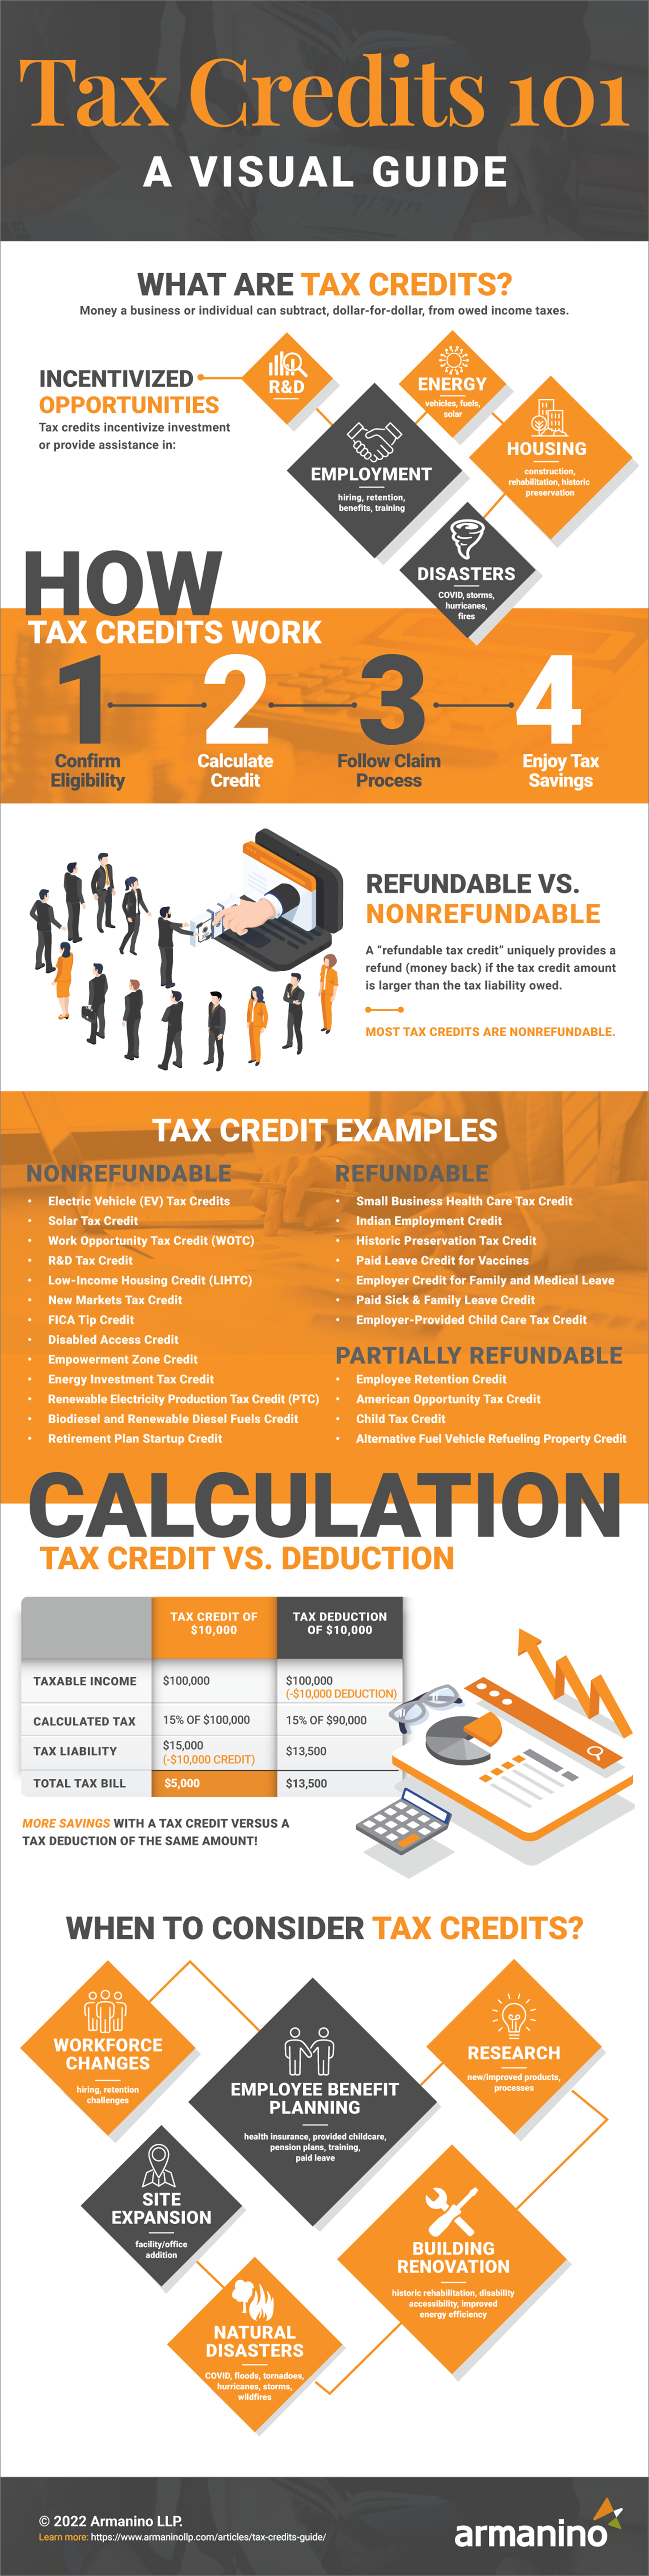 Tax Credits Guide Infographic